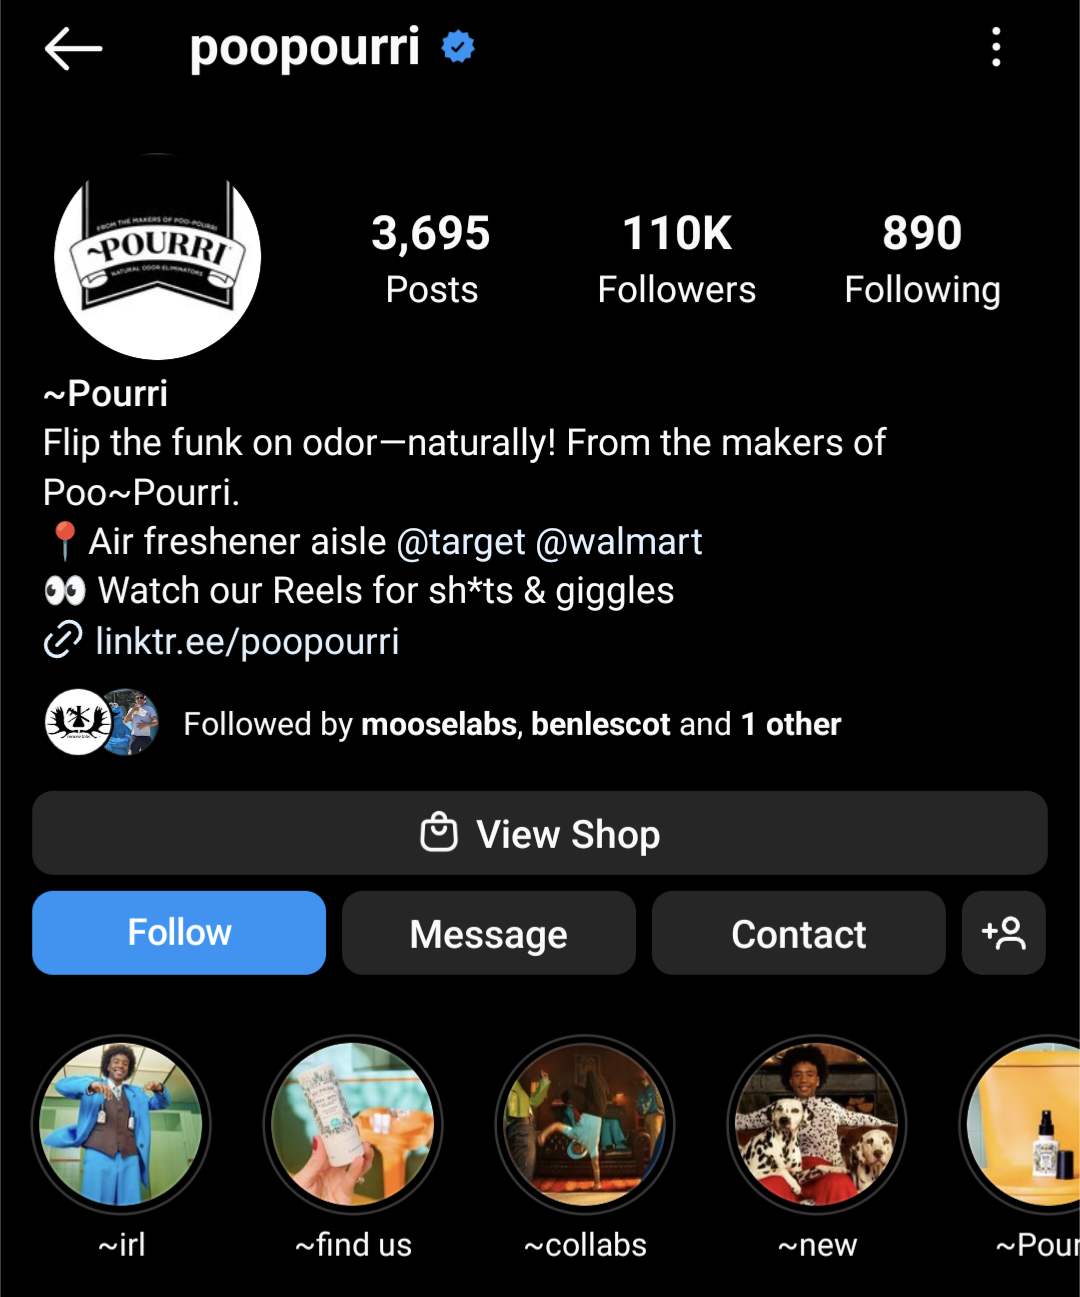 Poo-Pourri uses its Instagram bio to illustrate its funny brand voice